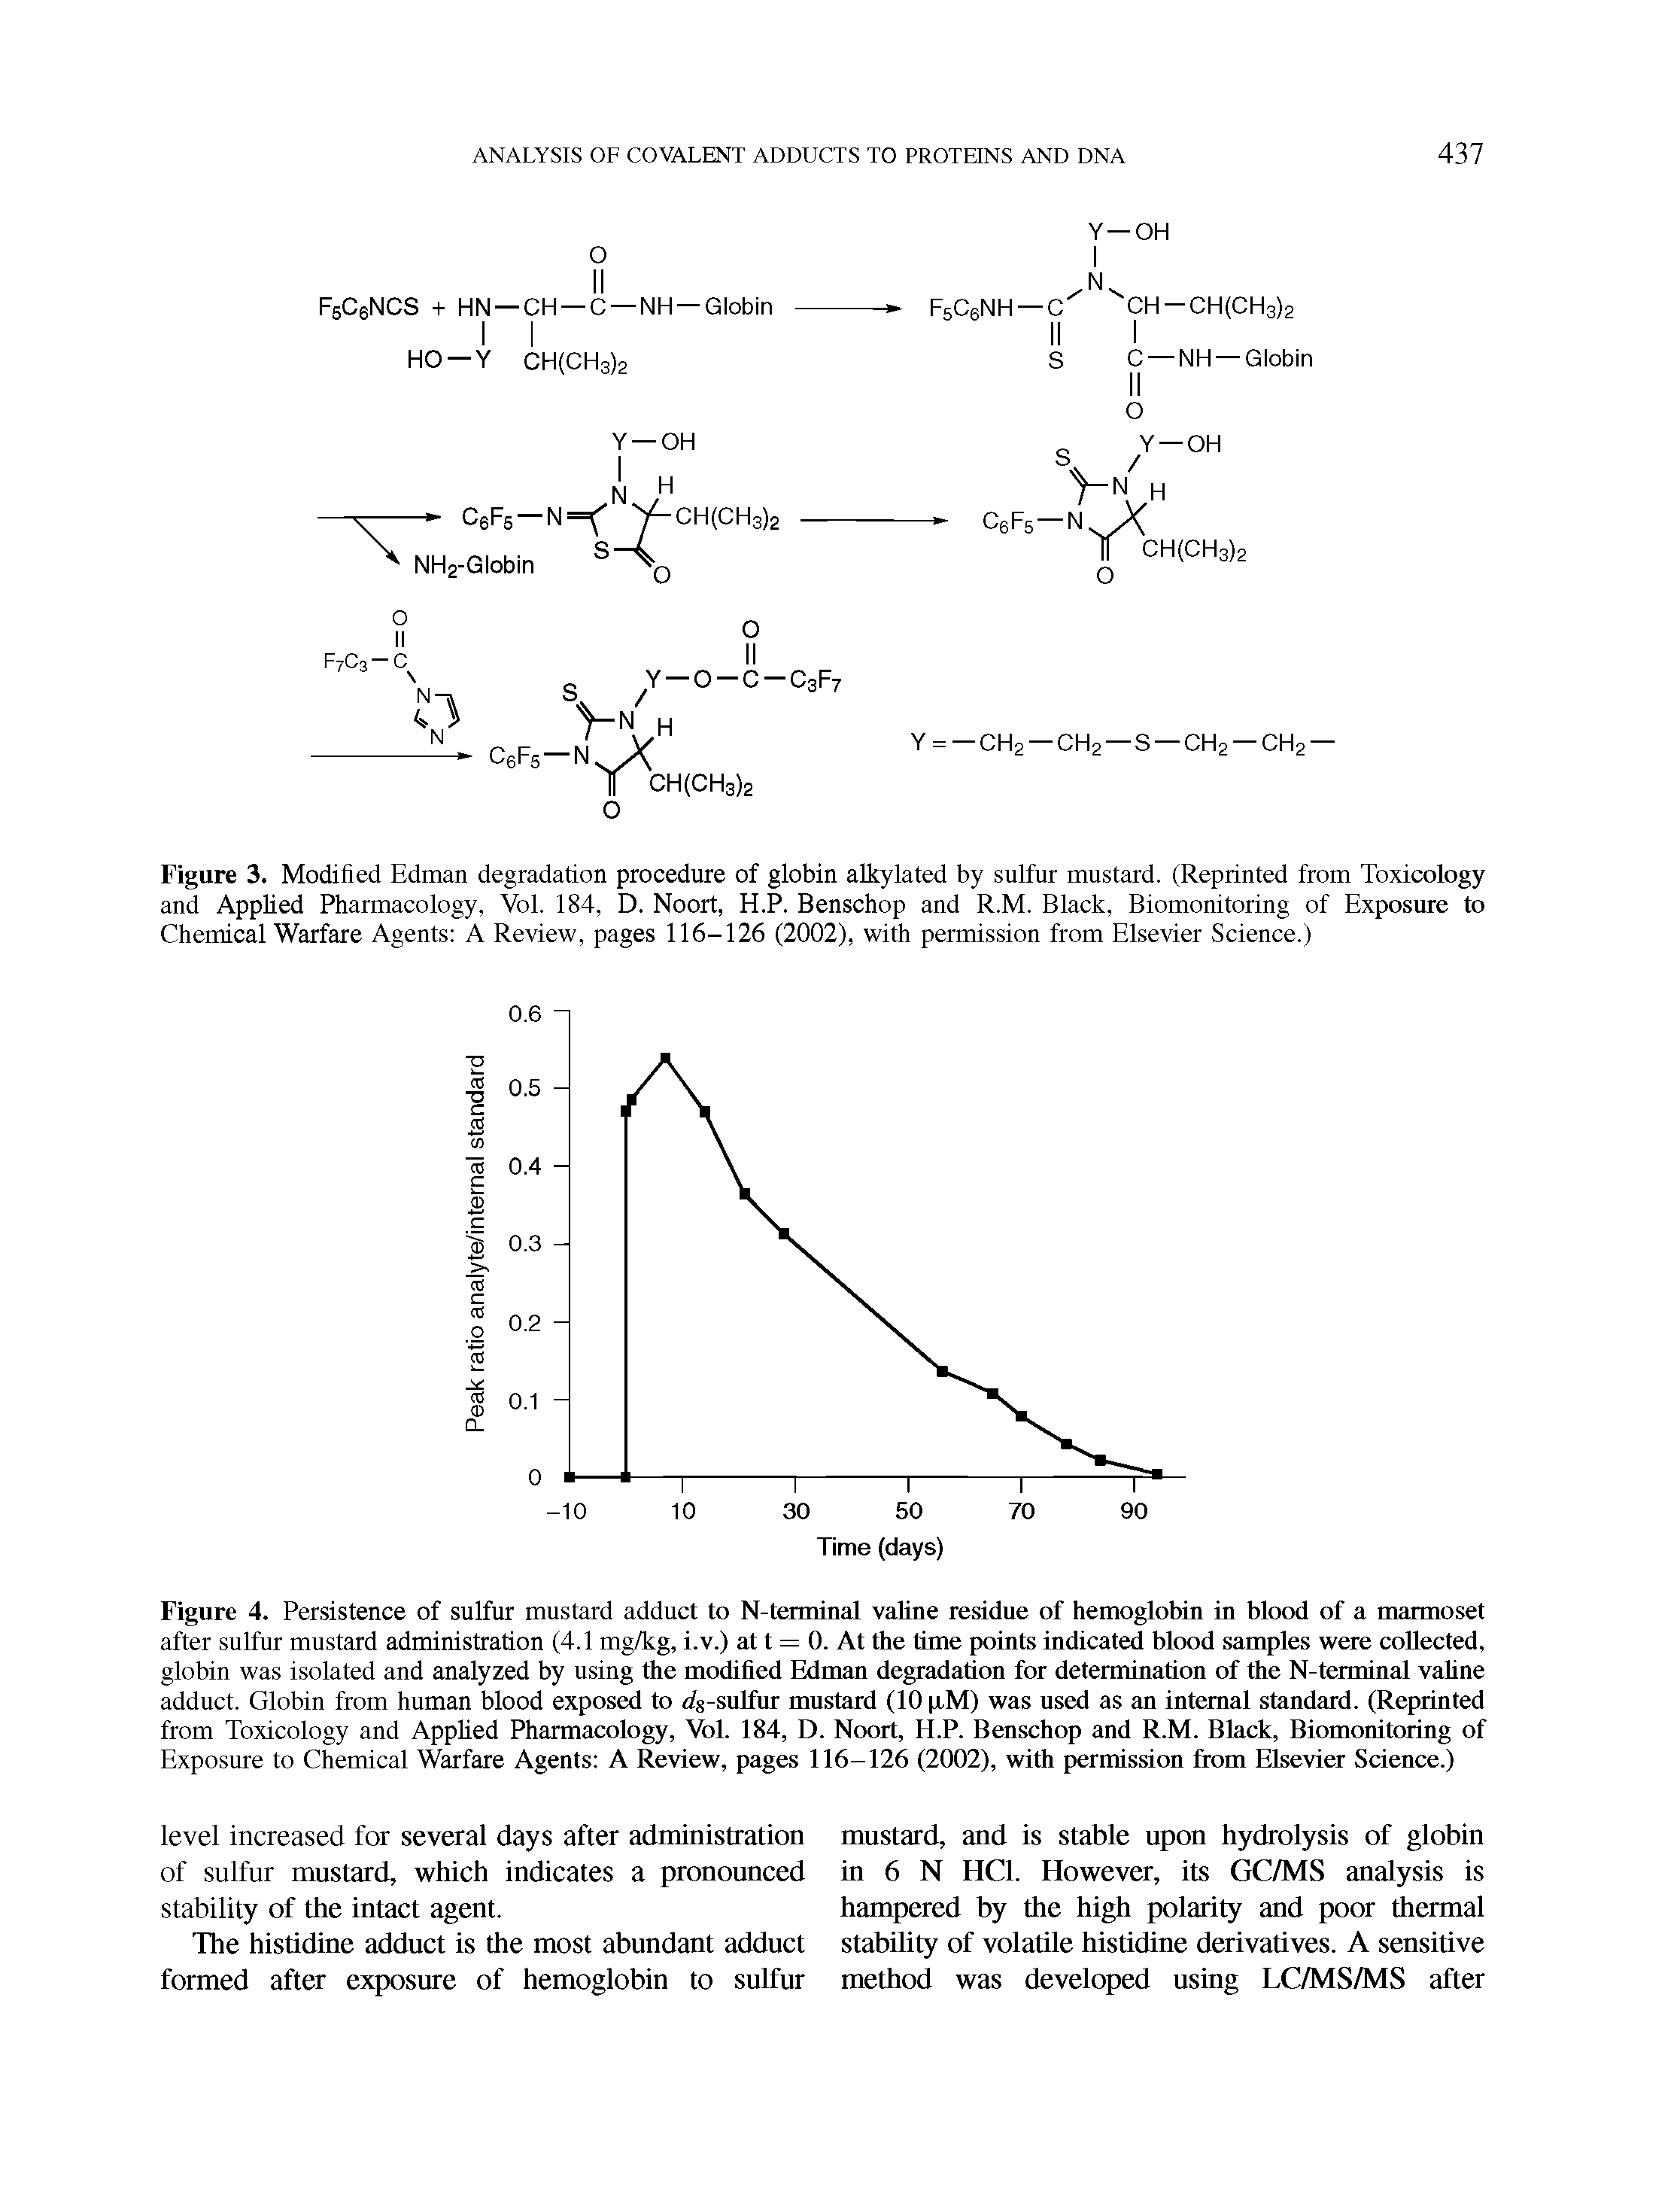 Figure 3. Modified Edman degradation procedure of globin alkylated by sulfur mustard. (Reprinted from Toxicology and Applied Pharmacology, Vol. 184, D. Noort, H.P. Benschop and R.M. Black, Biomonitoring of Exposure to Chemical Warfare Agents A Review, pages 116-126 (2002), with permission from Elsevier Science.)...